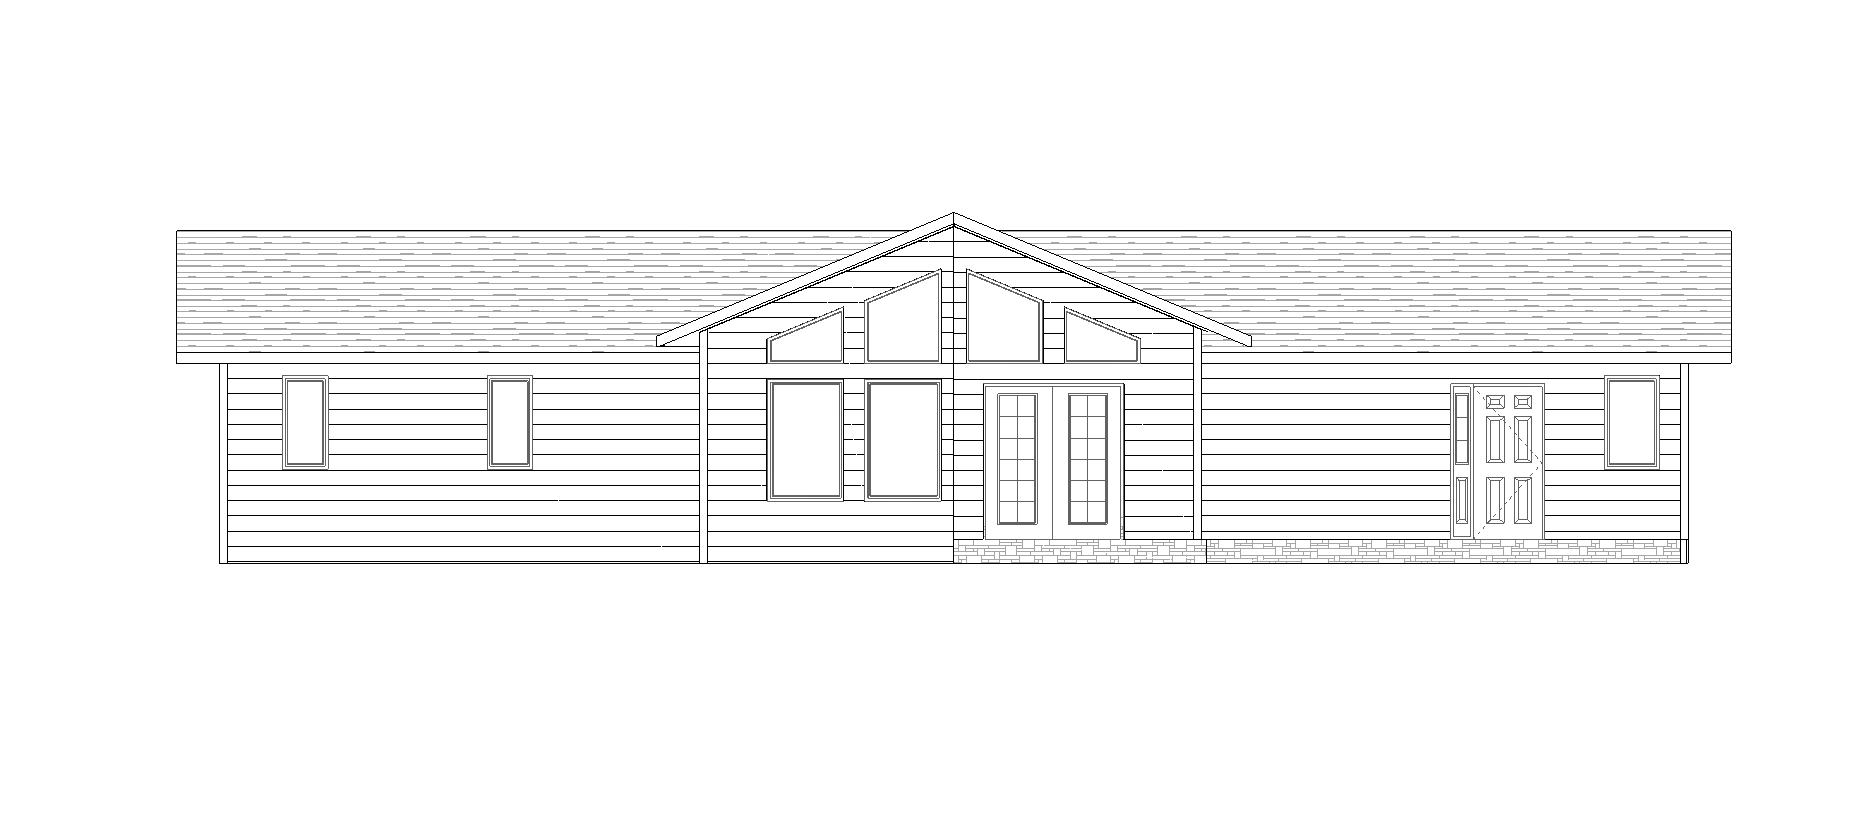 Penner Homes Elevation Map Id: 394